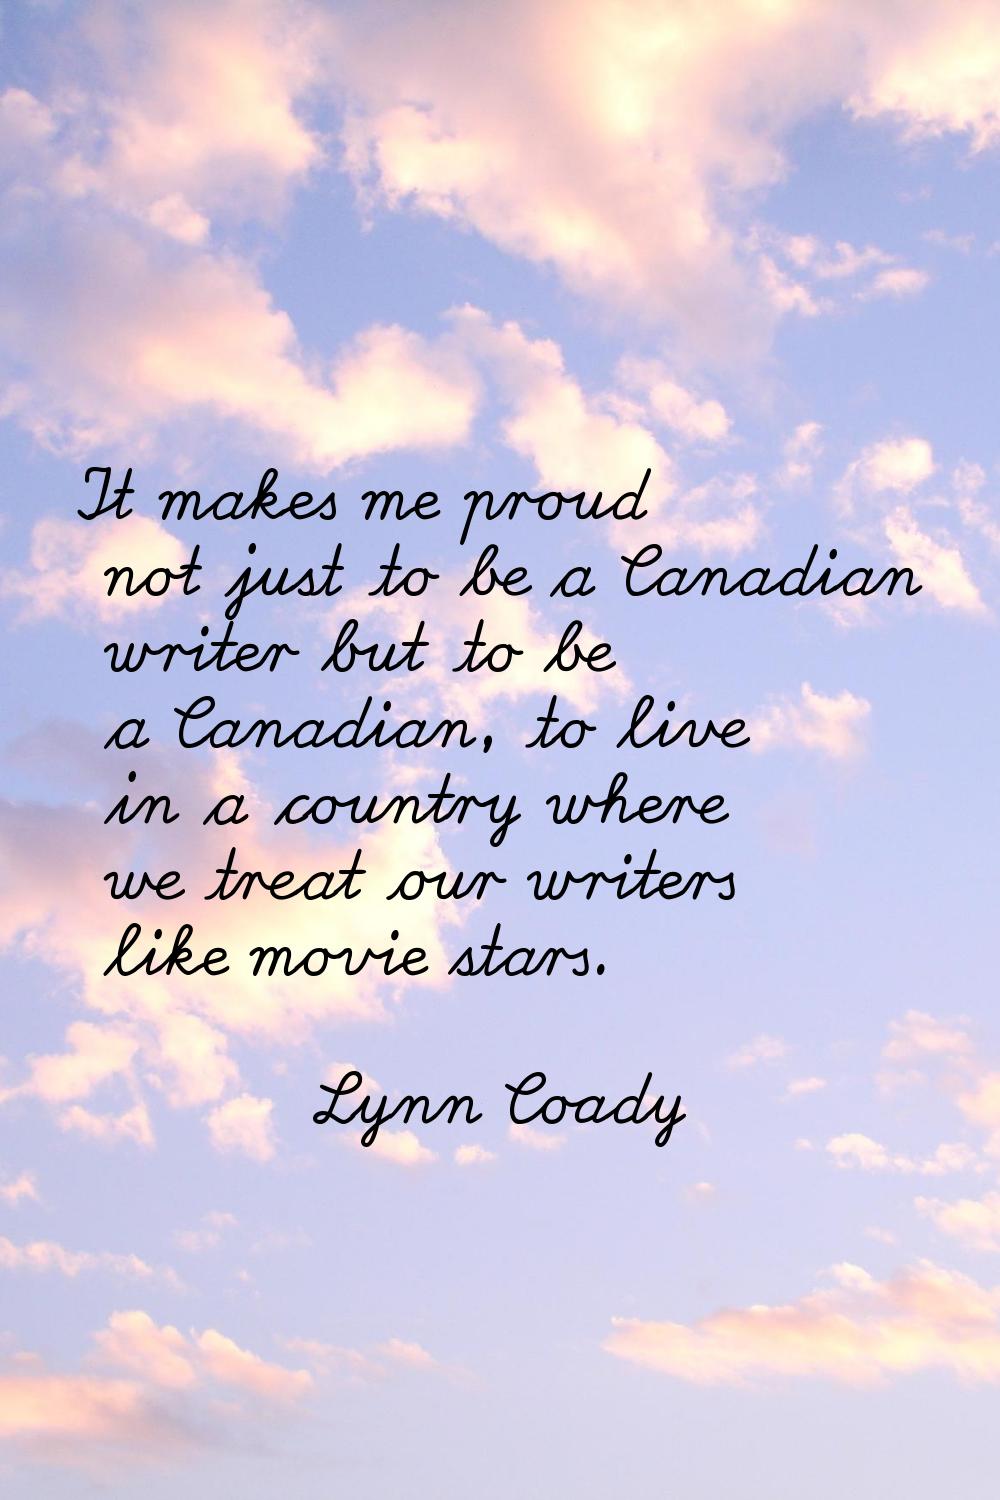 It makes me proud not just to be a Canadian writer but to be a Canadian, to live in a country where